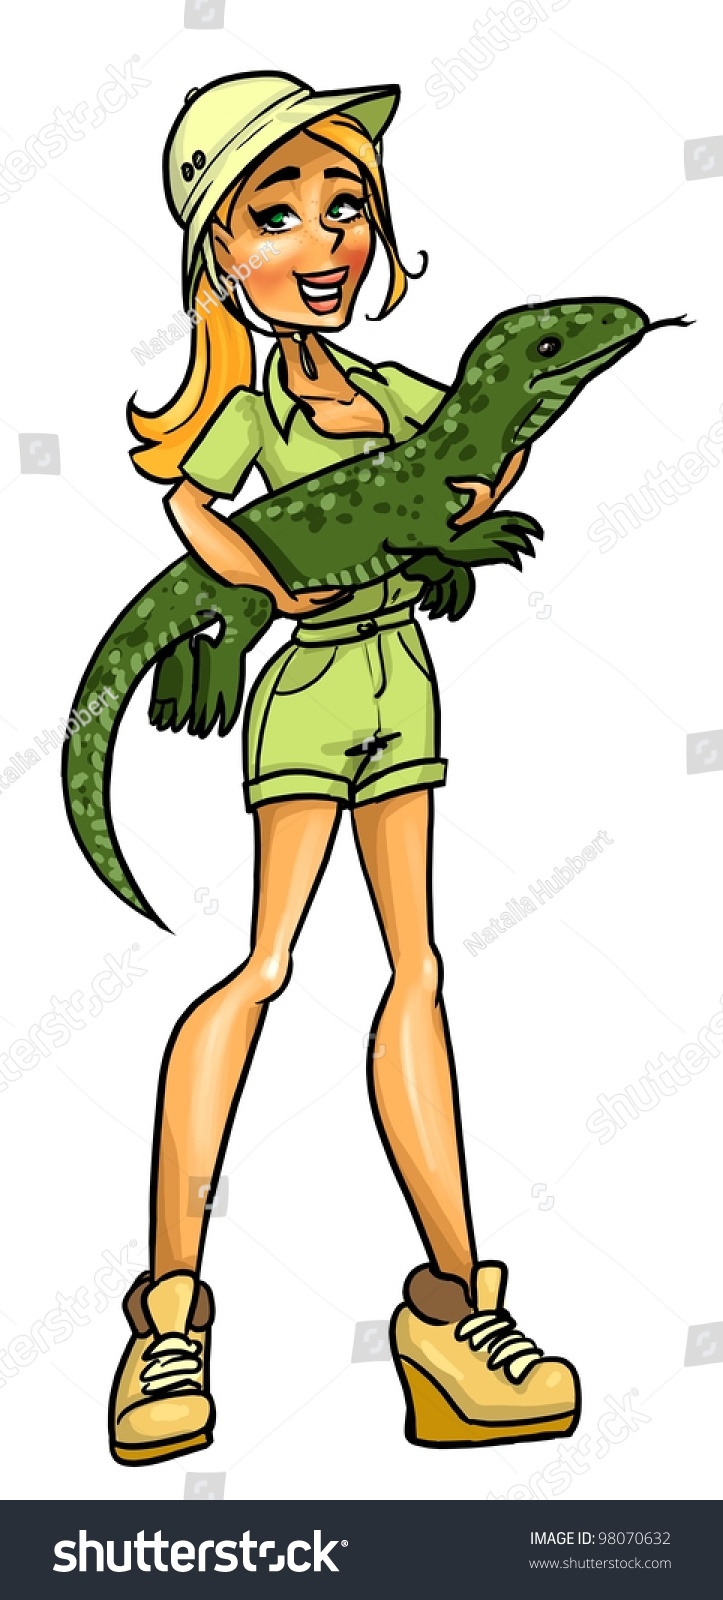 zoologist clipart - photo #6